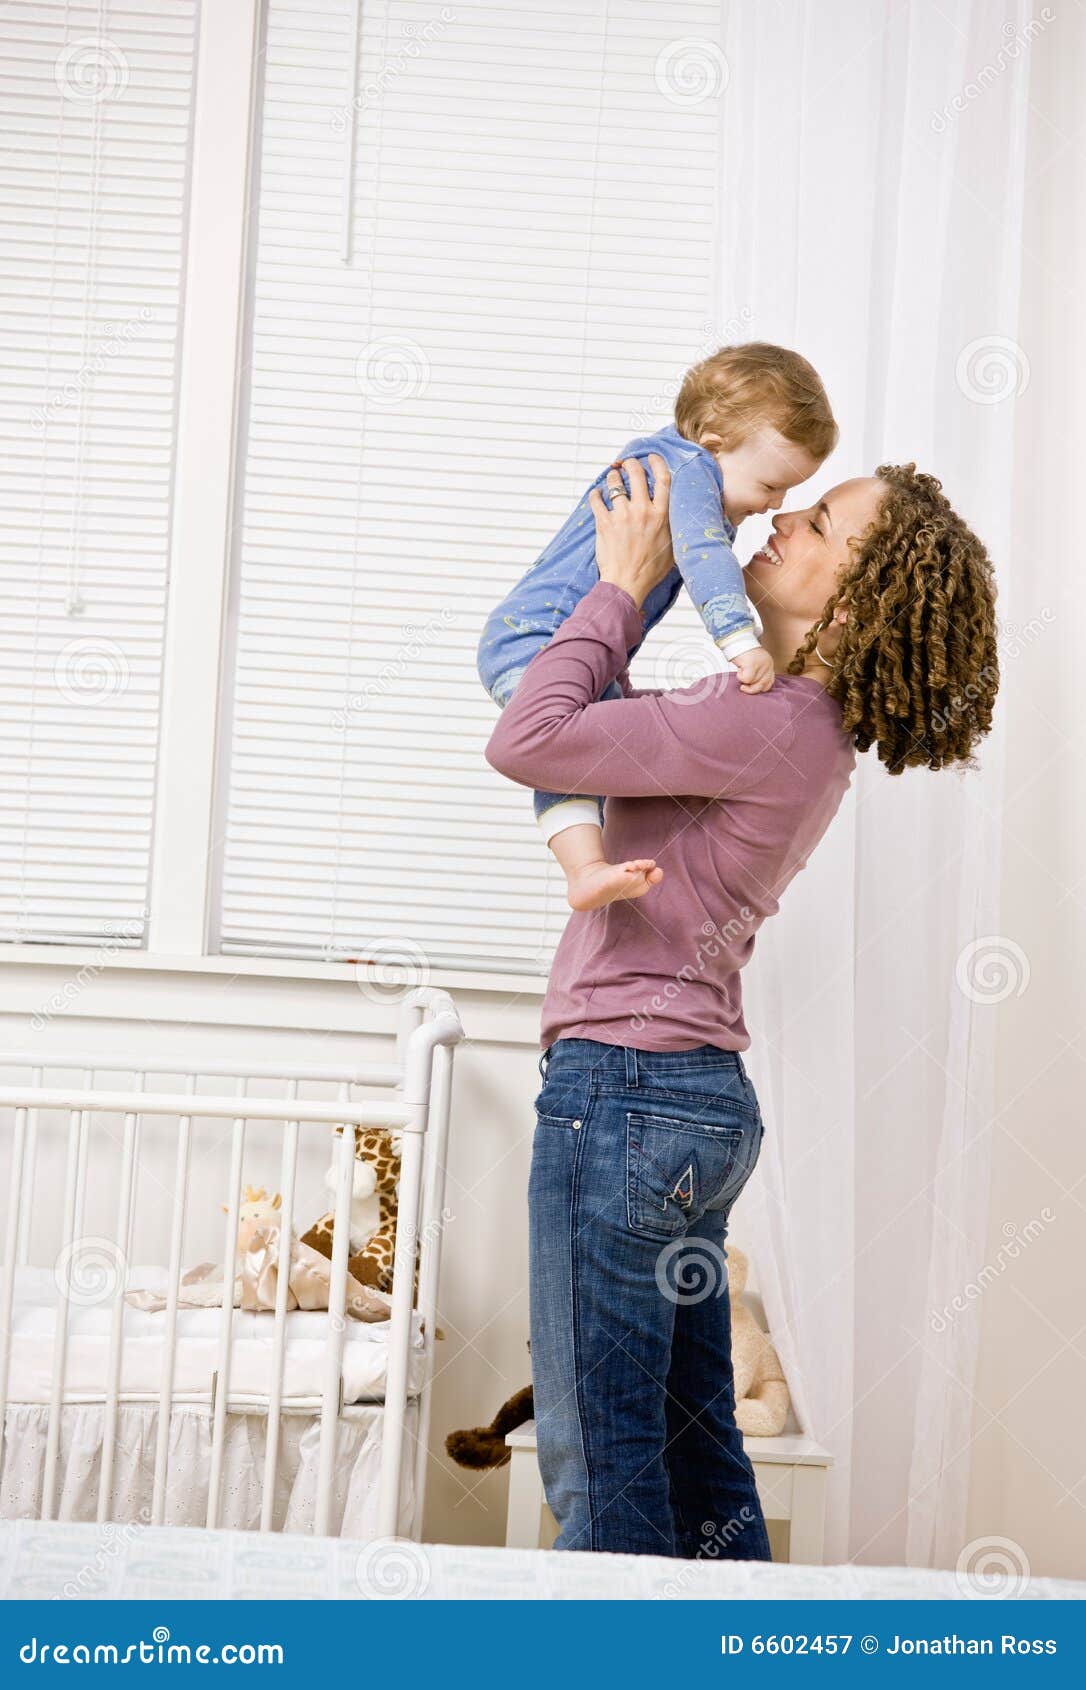 Mother Lifting Son From Crib In Bedroom Royalty Free Stock Photography ...